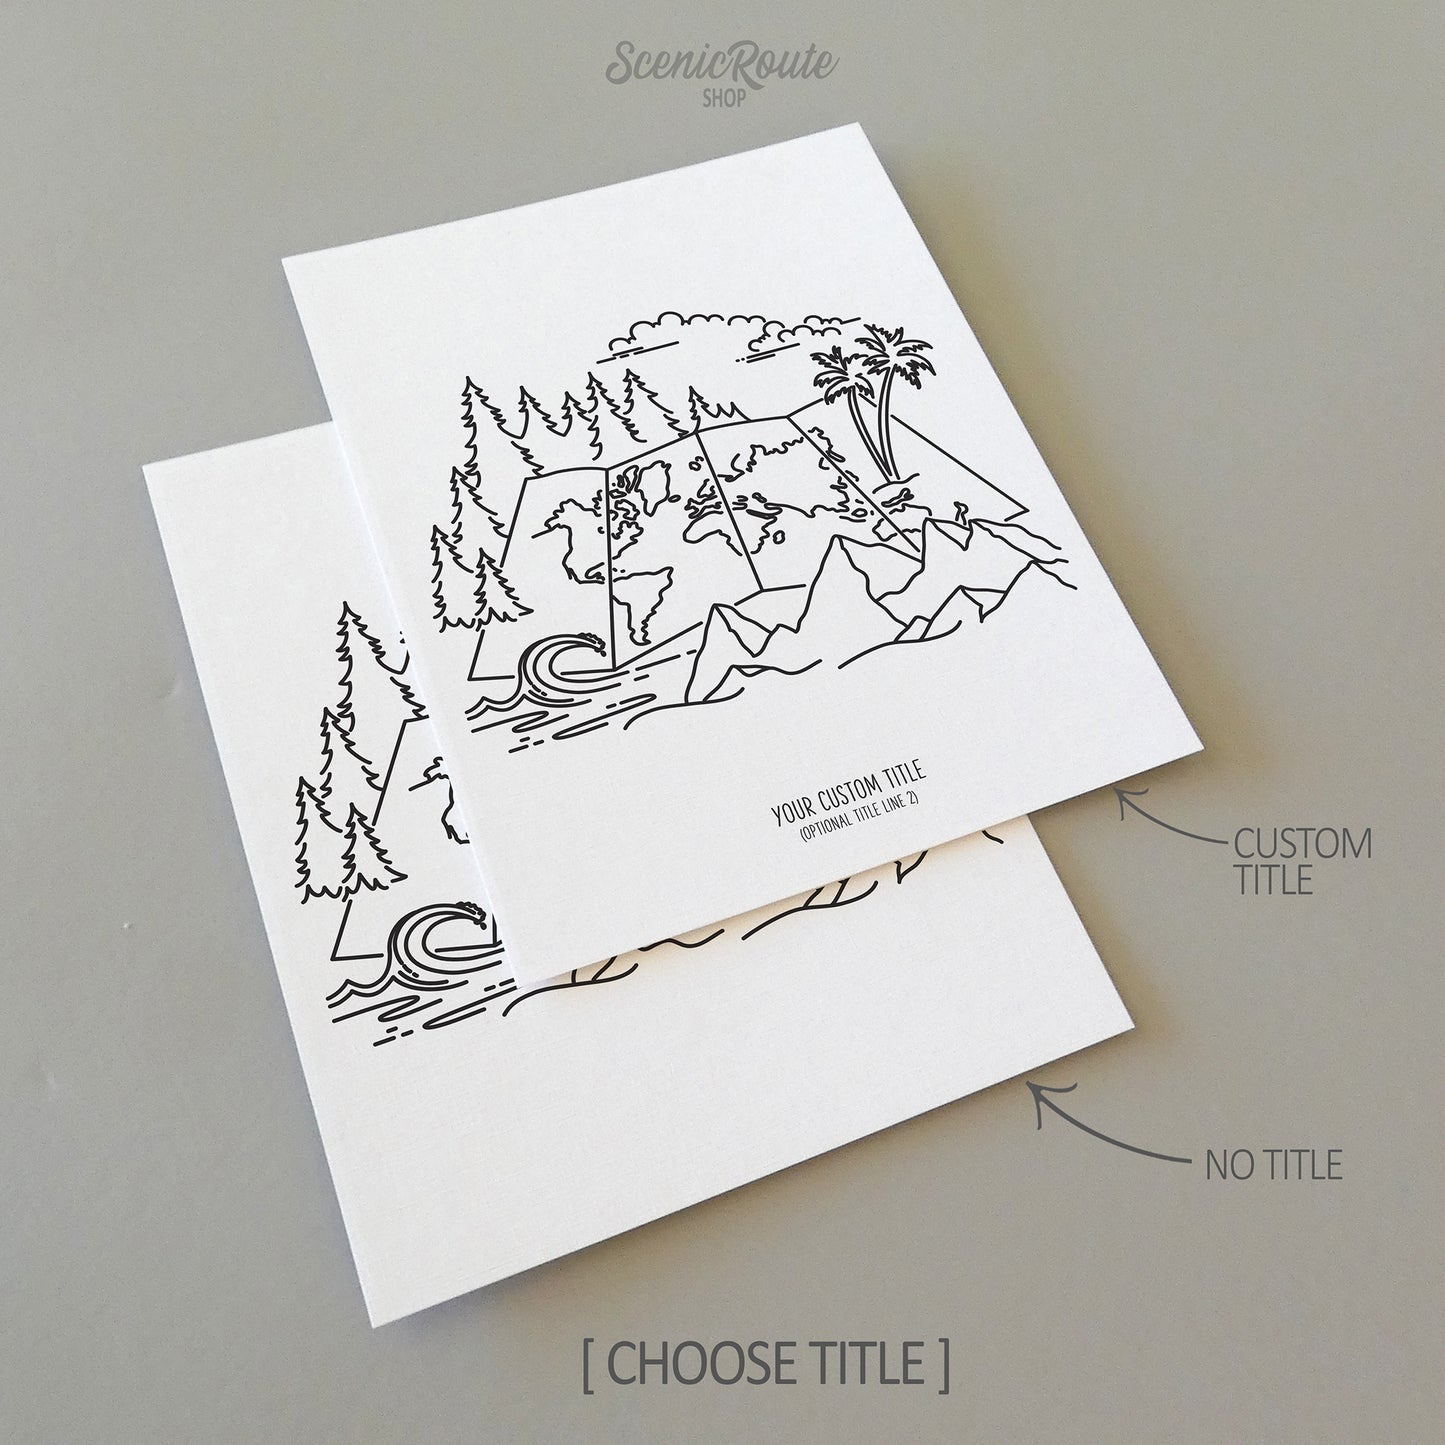 Two line art drawings of the Adventure Map Drawing on white linen paper with a gray background.  The pieces are shown with “No Title” and “Custom Title” options for the available art print options.